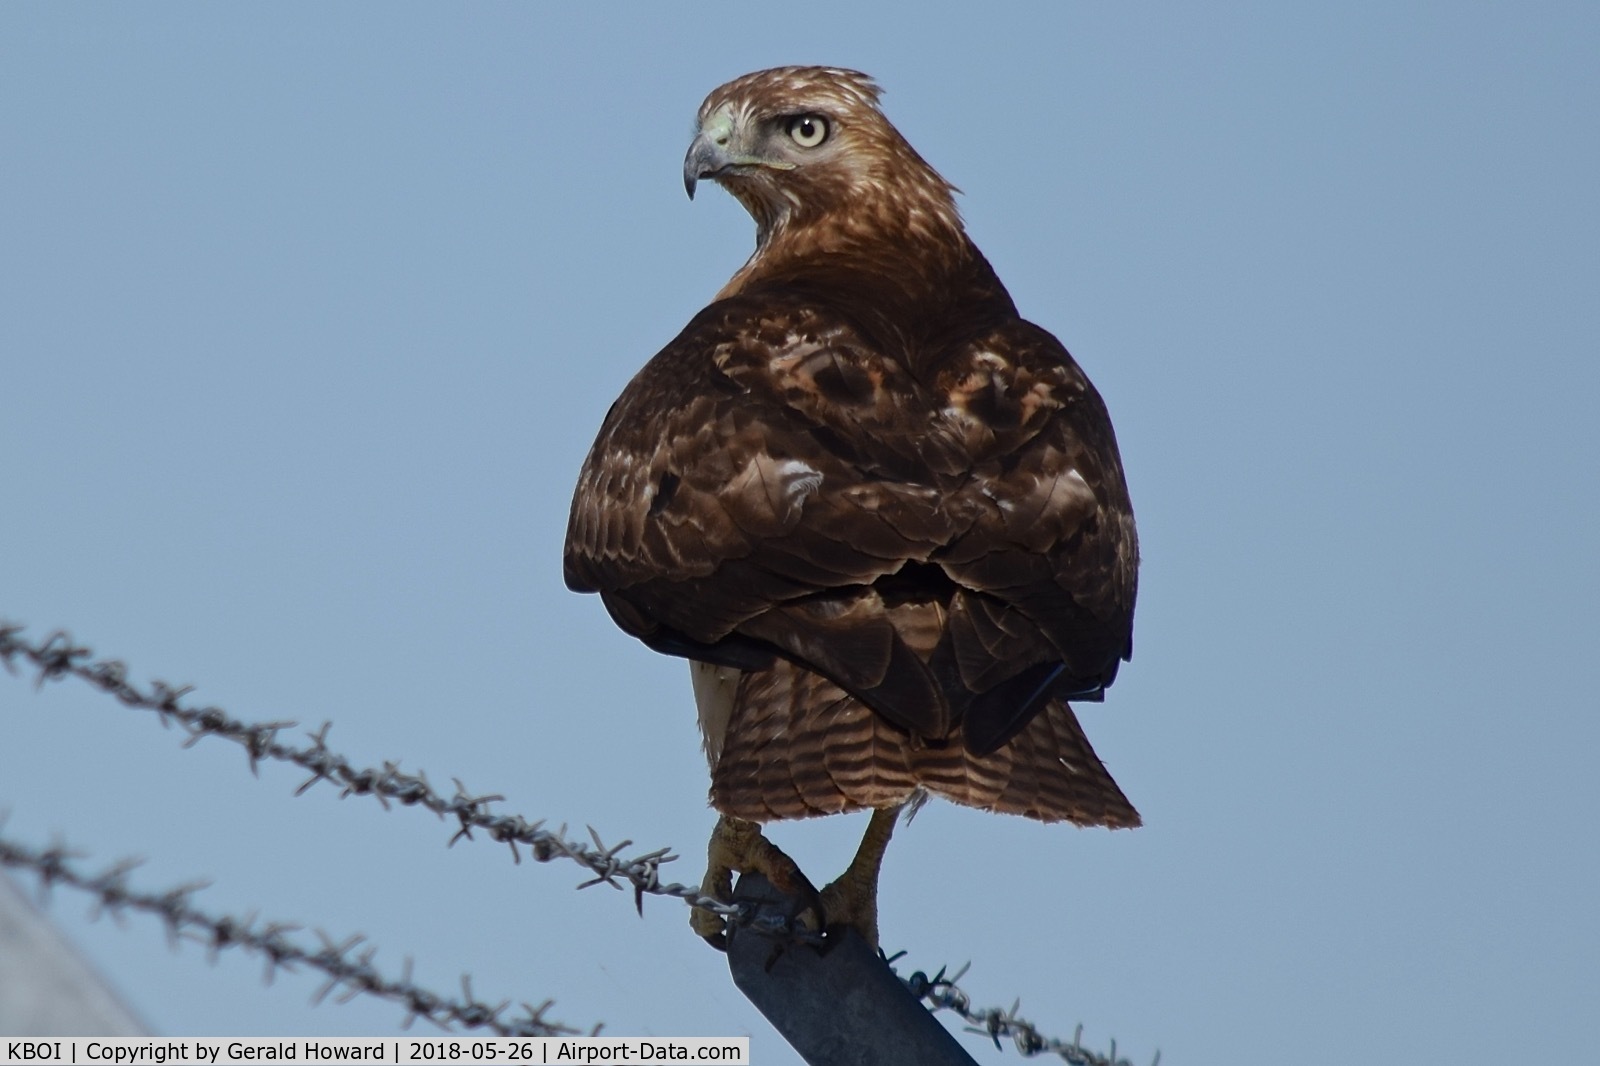 Boise Air Terminal/gowen Fld Airport (BOI) - One of many Red Tailed hawks around the airport property searching for the next meal from the many rodents infesting the ground.